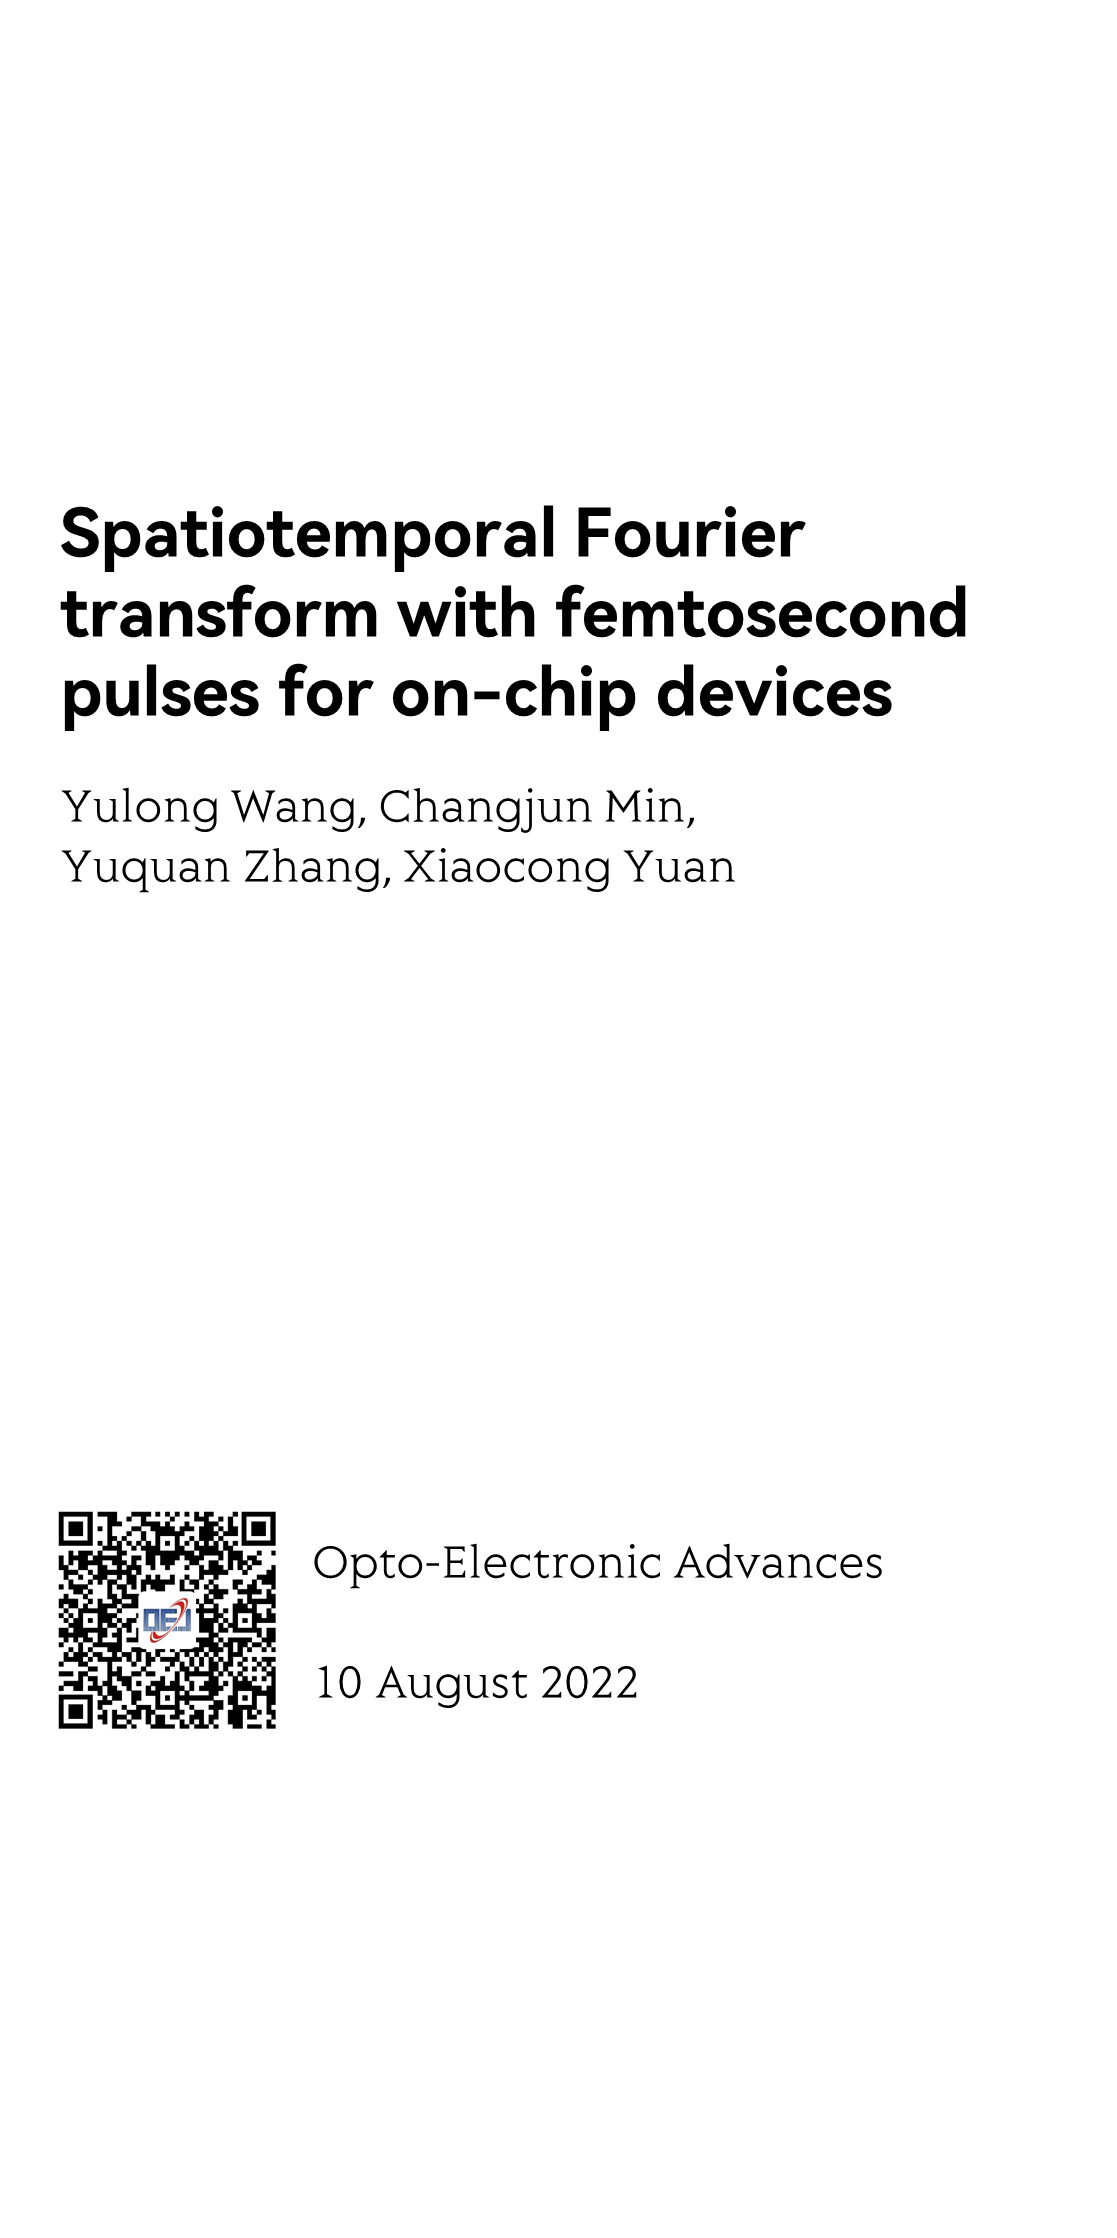 Spatiotemporal Fourier transform with femtosecond pulses for on-chip devices_1